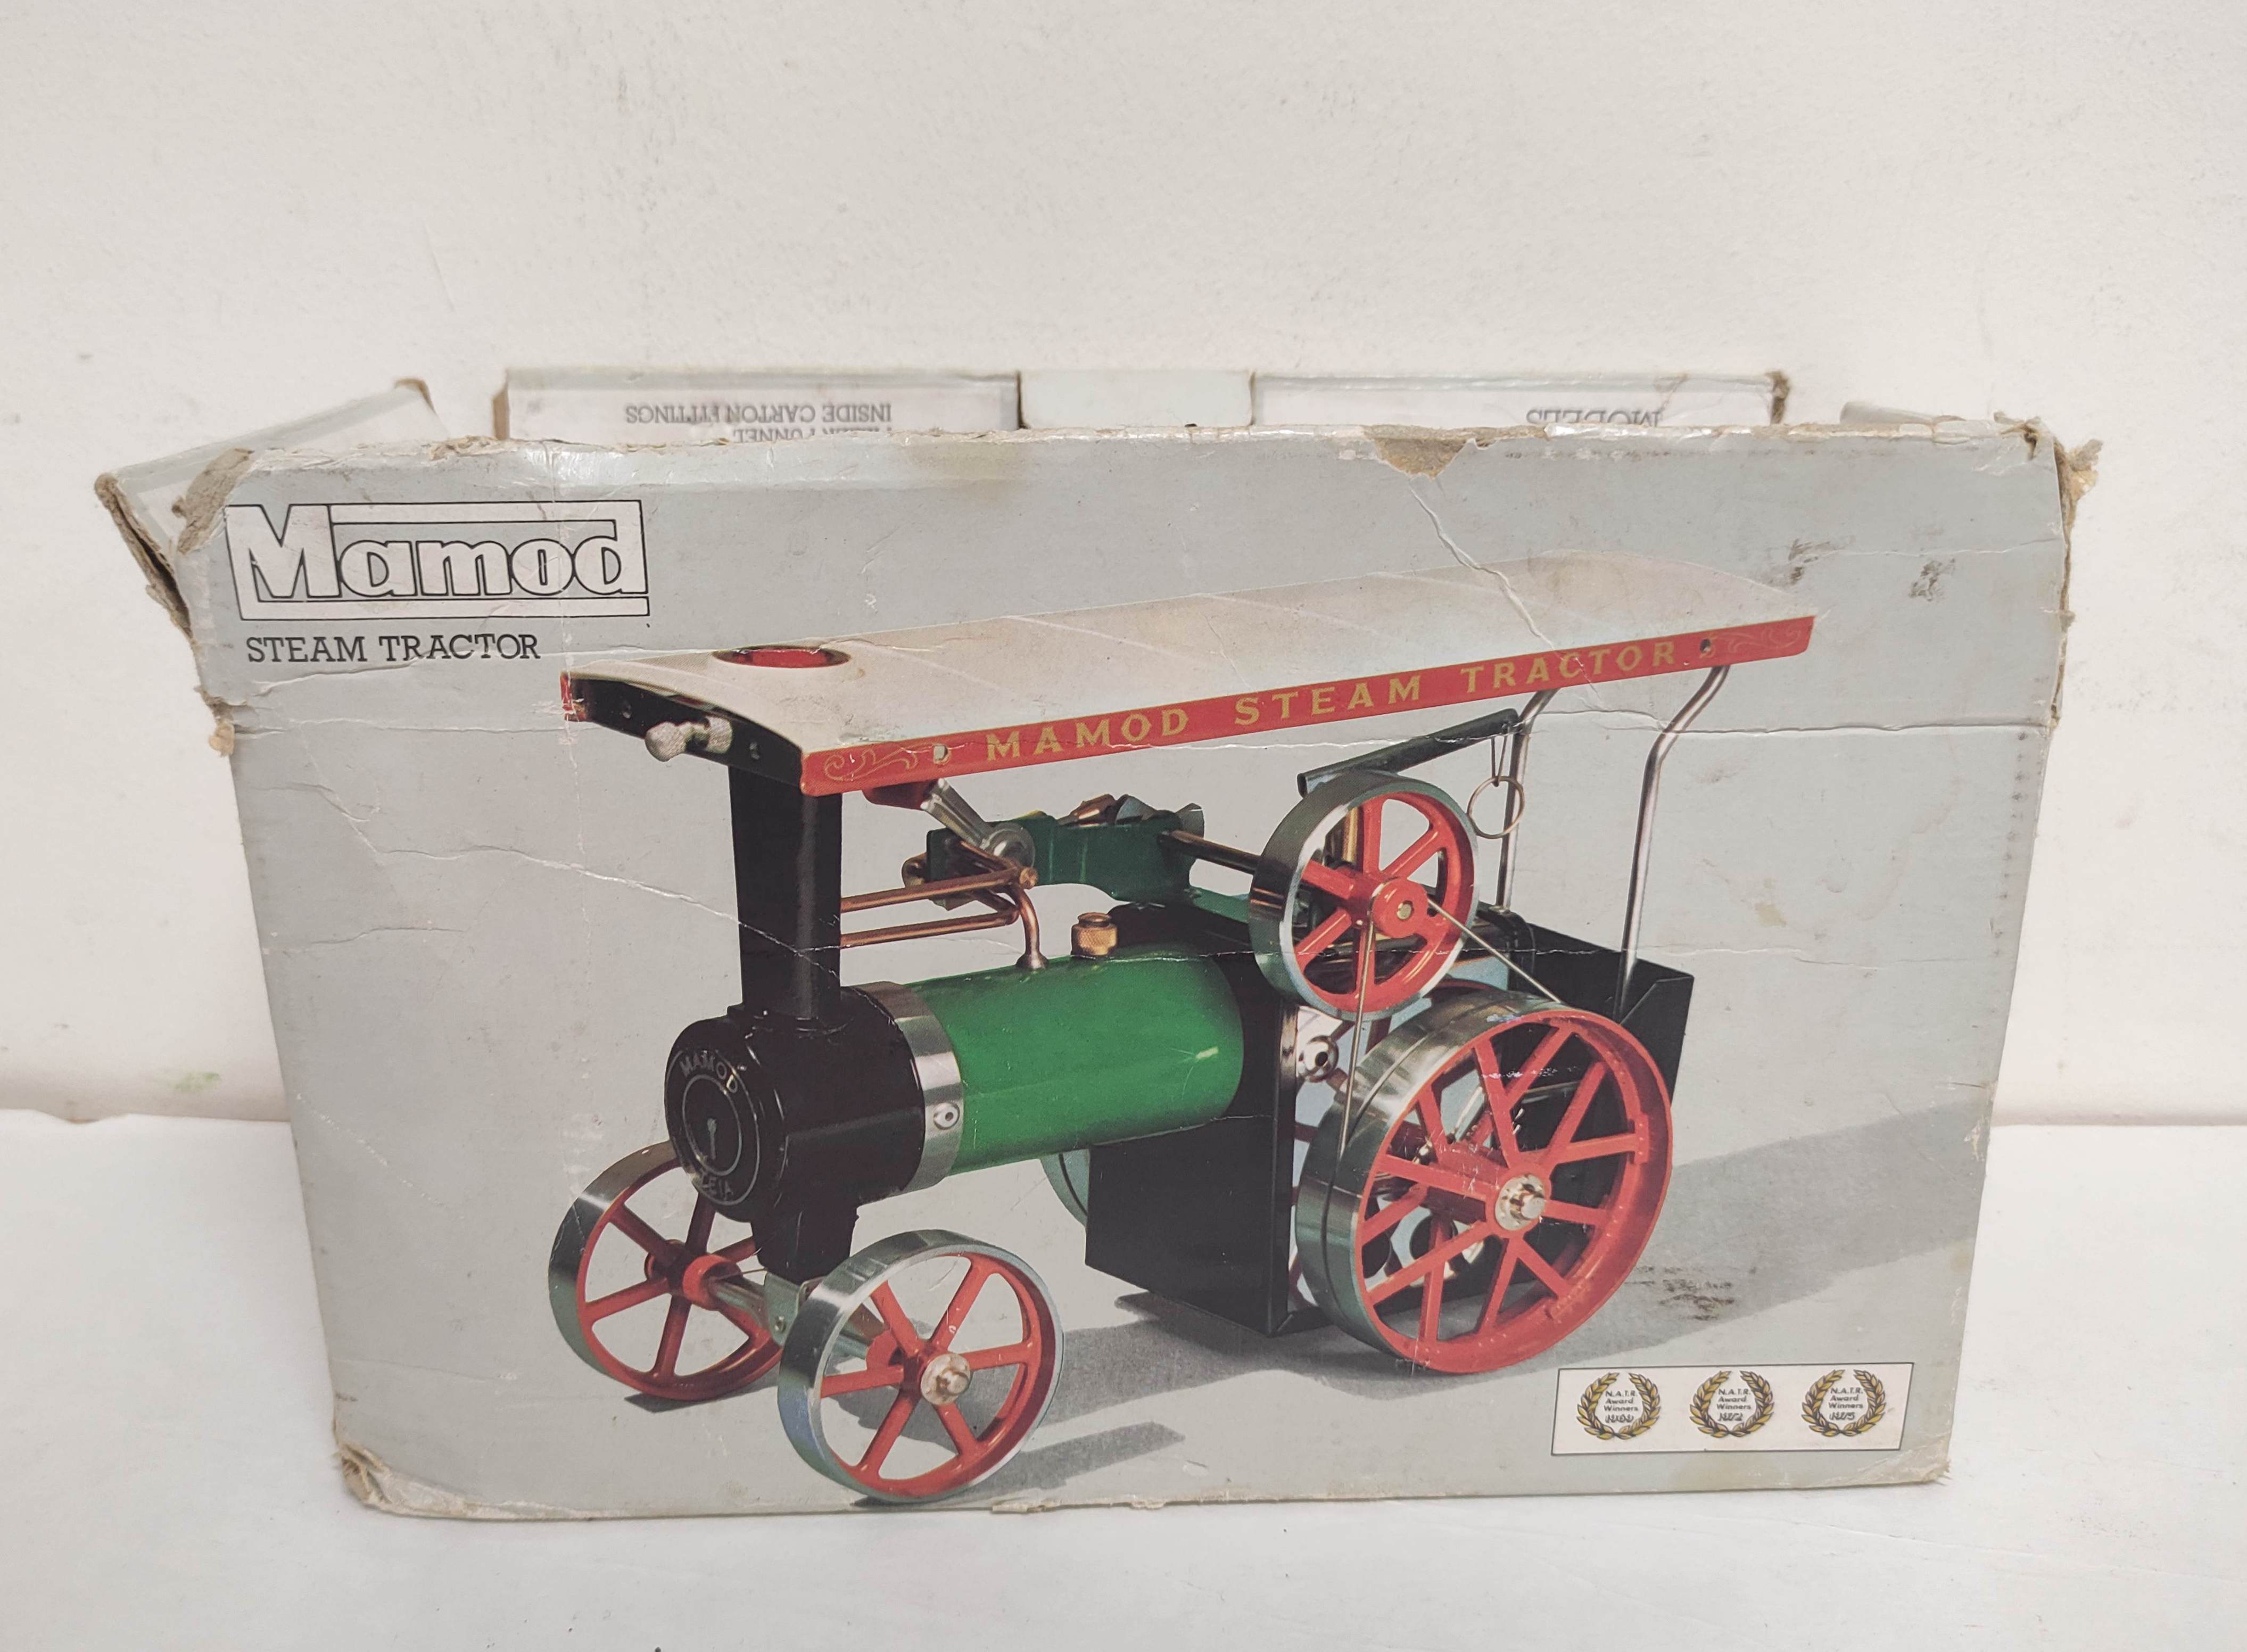 Vintage Mamod Steam Tractor TE1A with solid fuel tablets. With original defective box. - Image 2 of 6